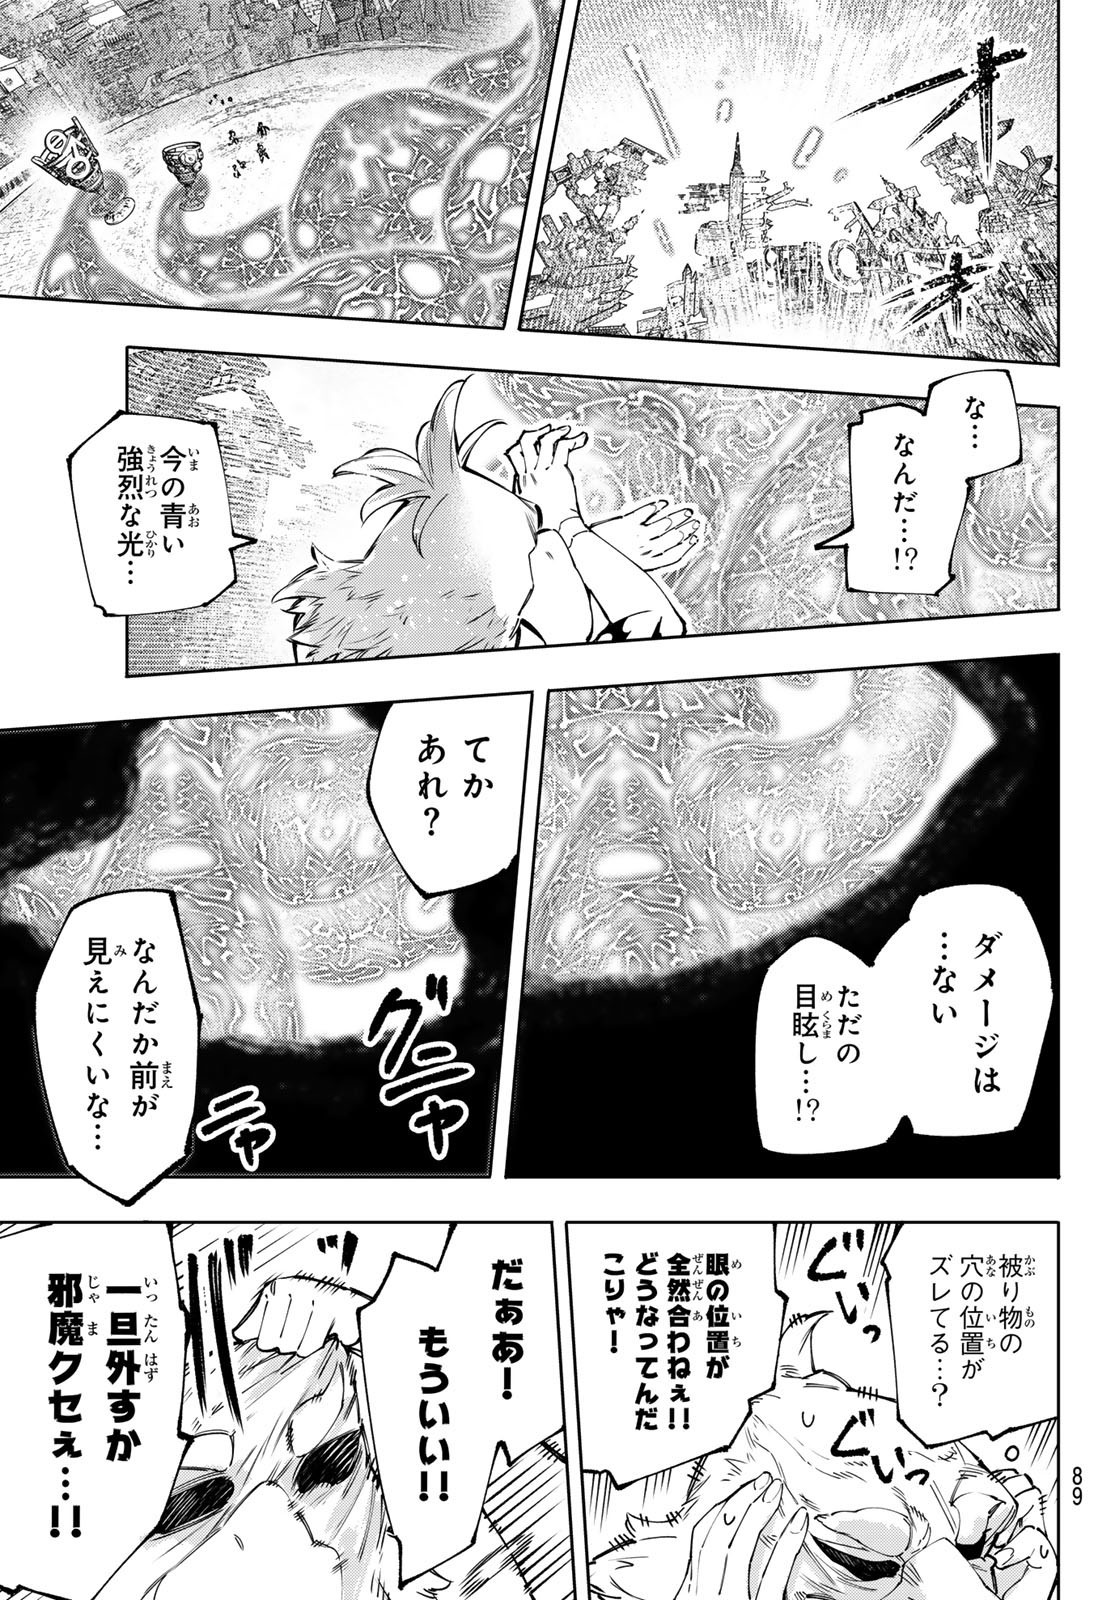 Weekly Shōnen Magazine - 週刊少年マガジン - Chapter 2024-32 - Page 87